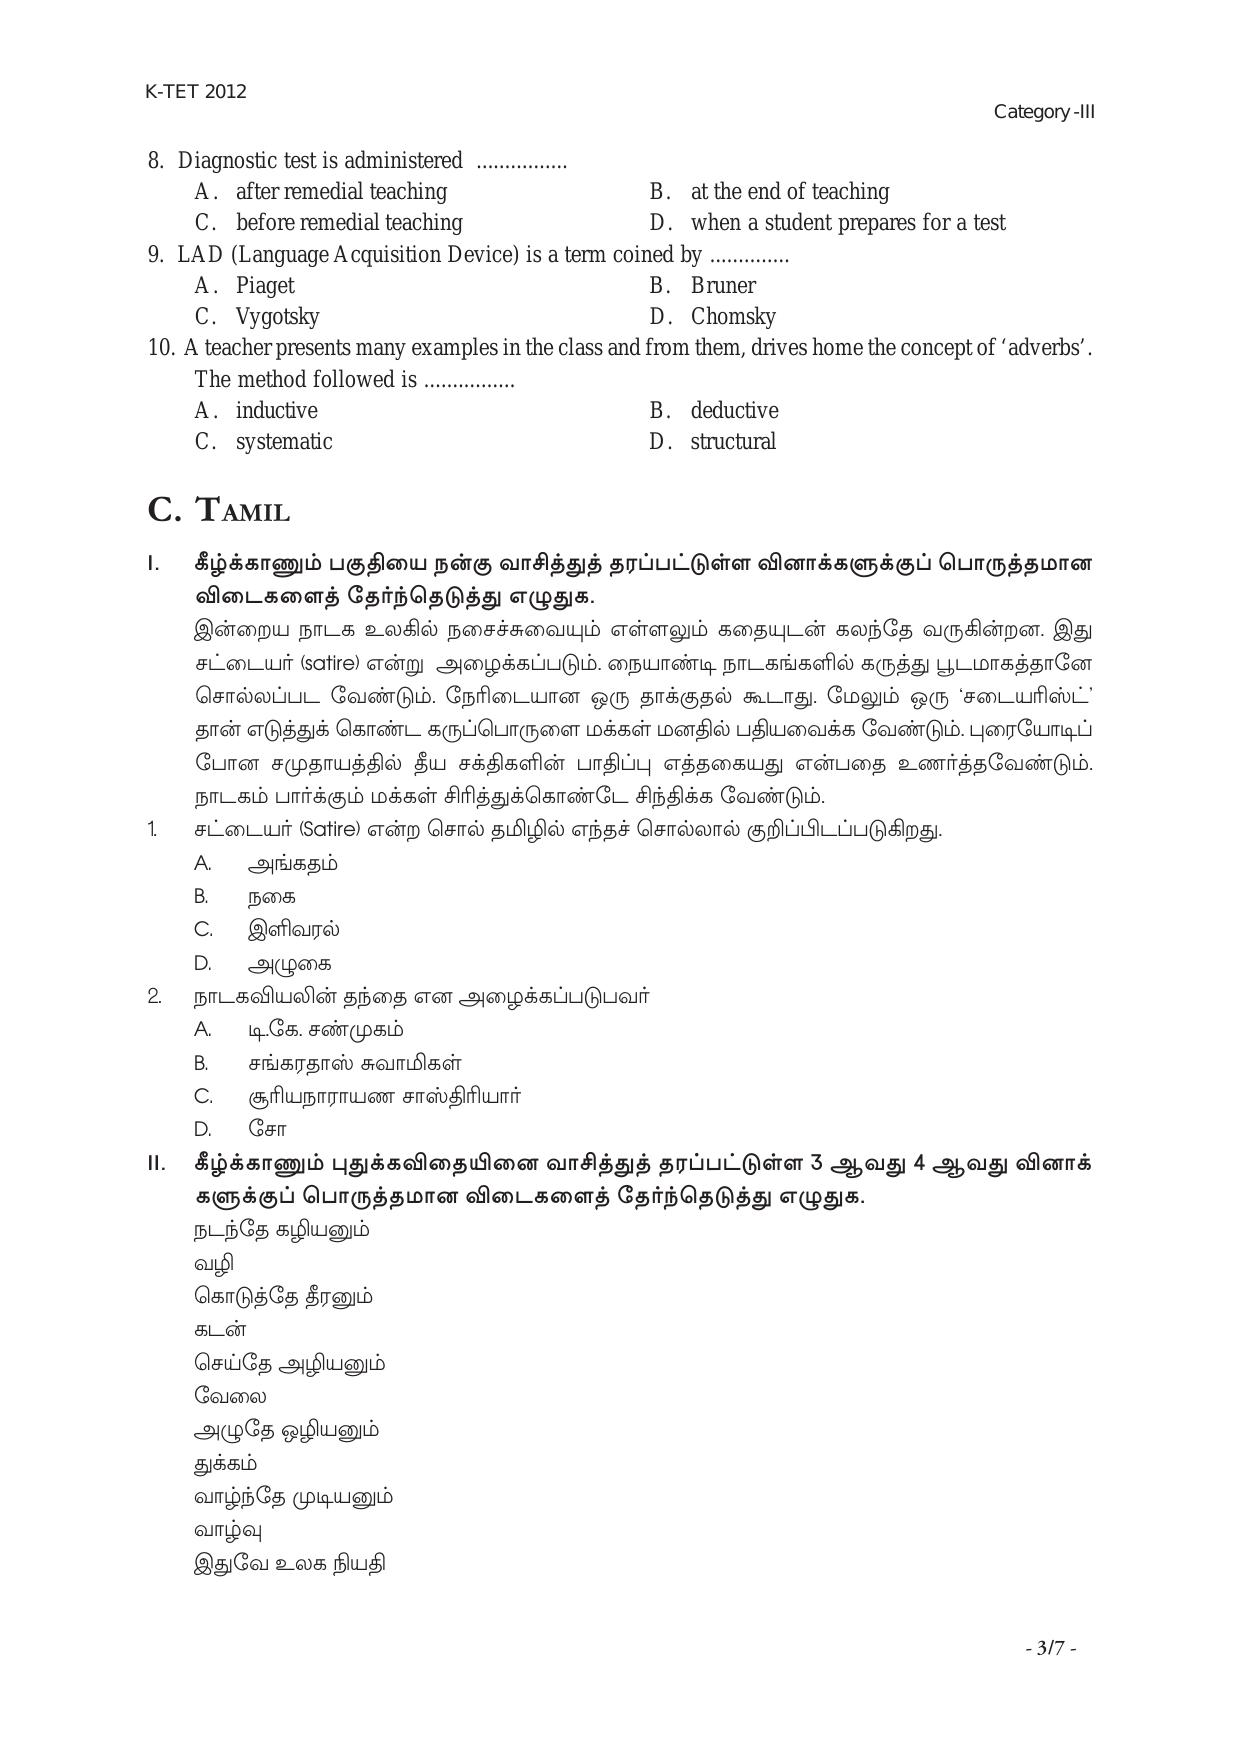 KTET Category III High School Teacher (8 to 10) Exam Previous Papers - Page 7